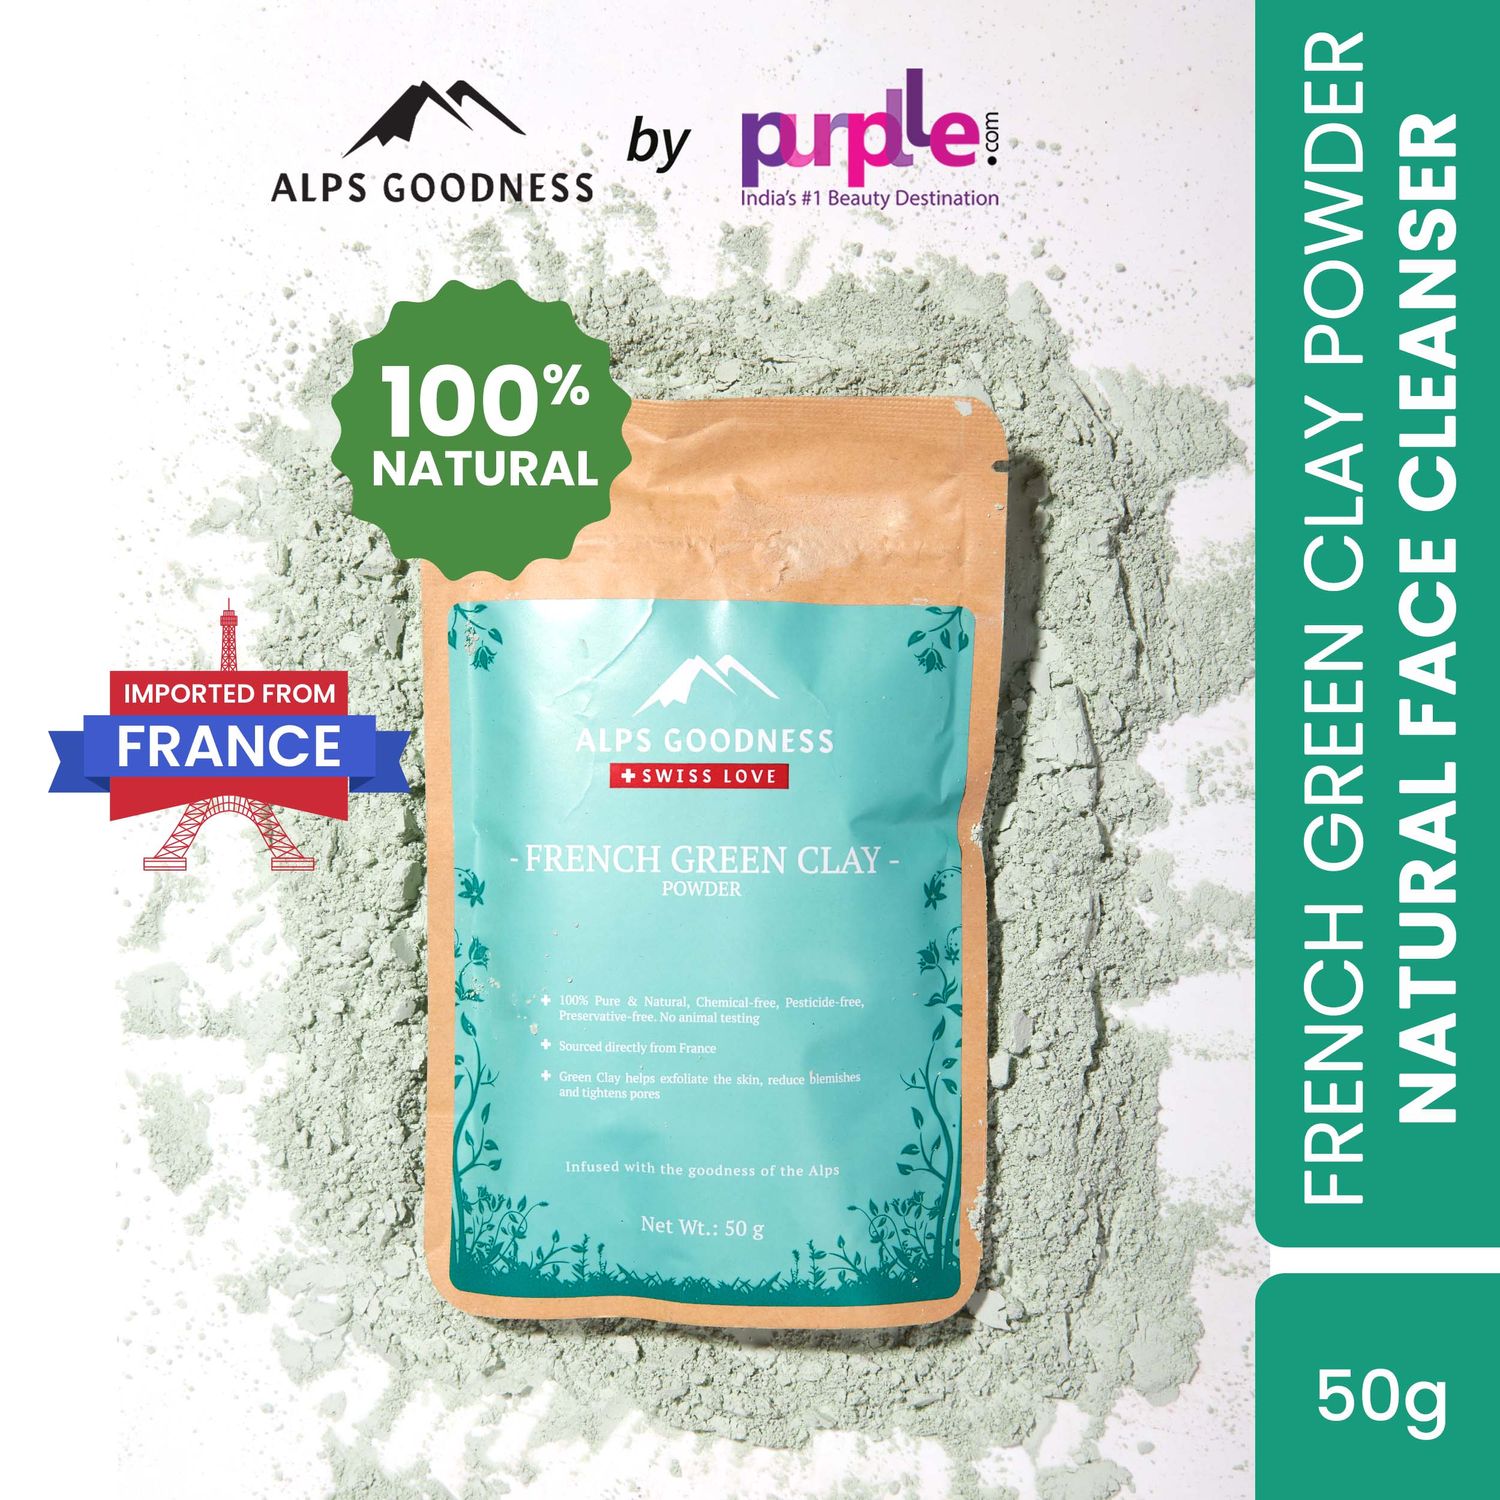 Alps Goodness French Green Clay Powder (50 gm)| 100% Natural Powder | Clay Mask for pores tightening | Clay Mask for face | Detoxifying Clay Mask